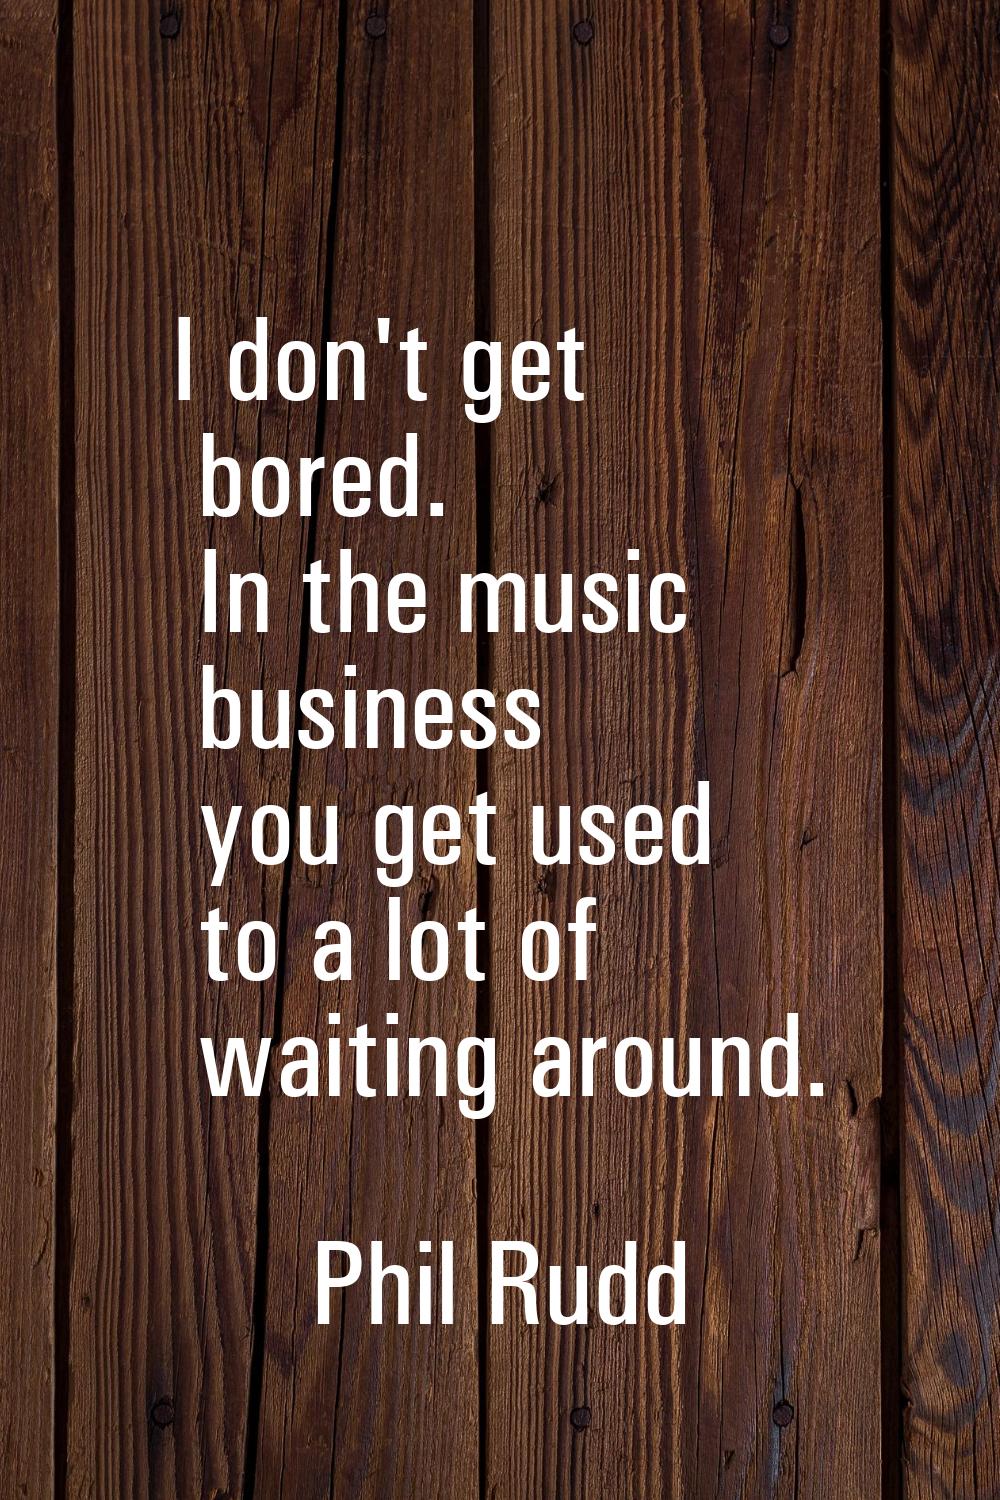 I don't get bored. In the music business you get used to a lot of waiting around.